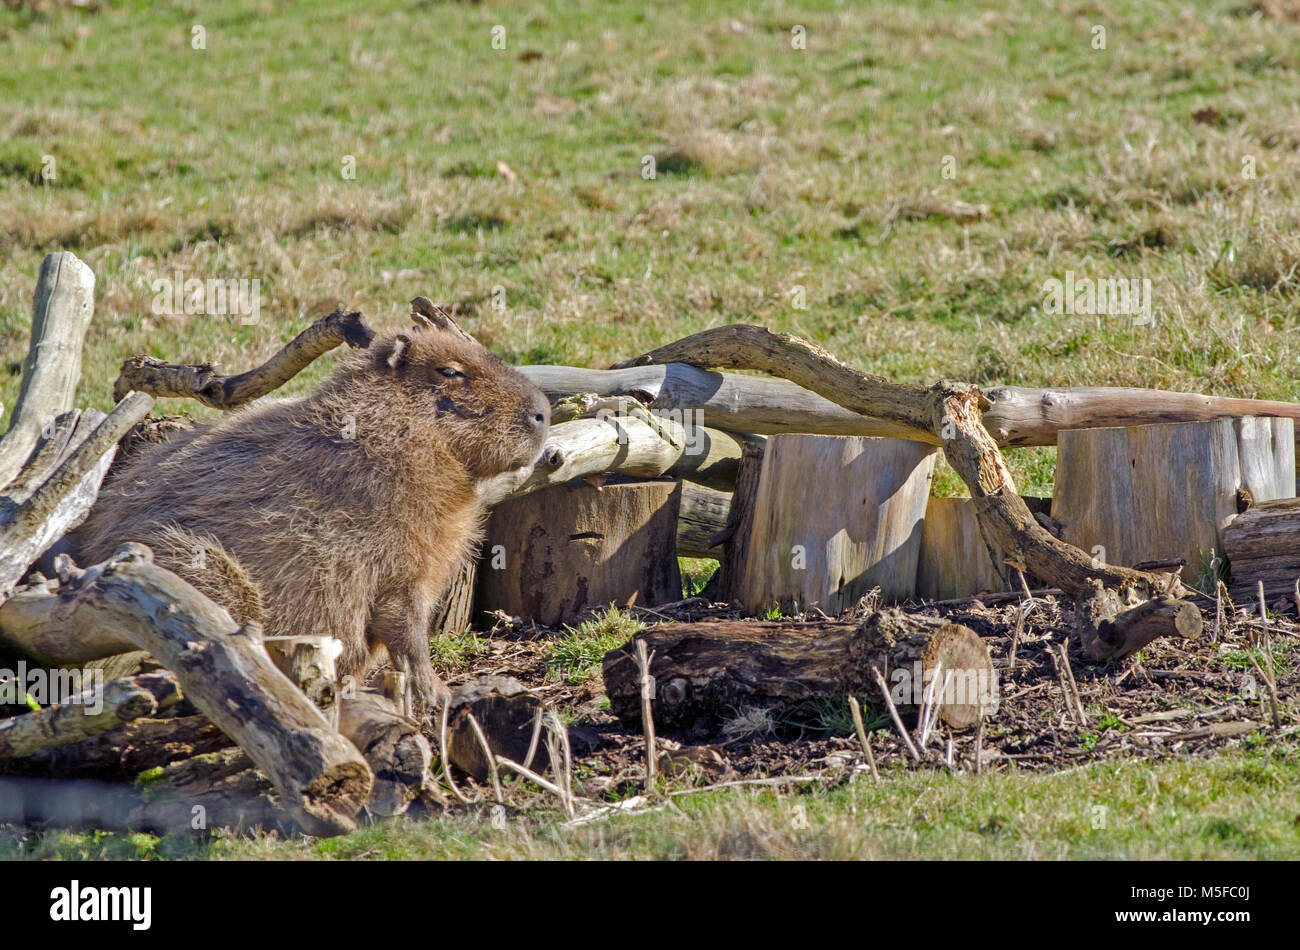 A Capybara takes shelter from the wind Stock Photo